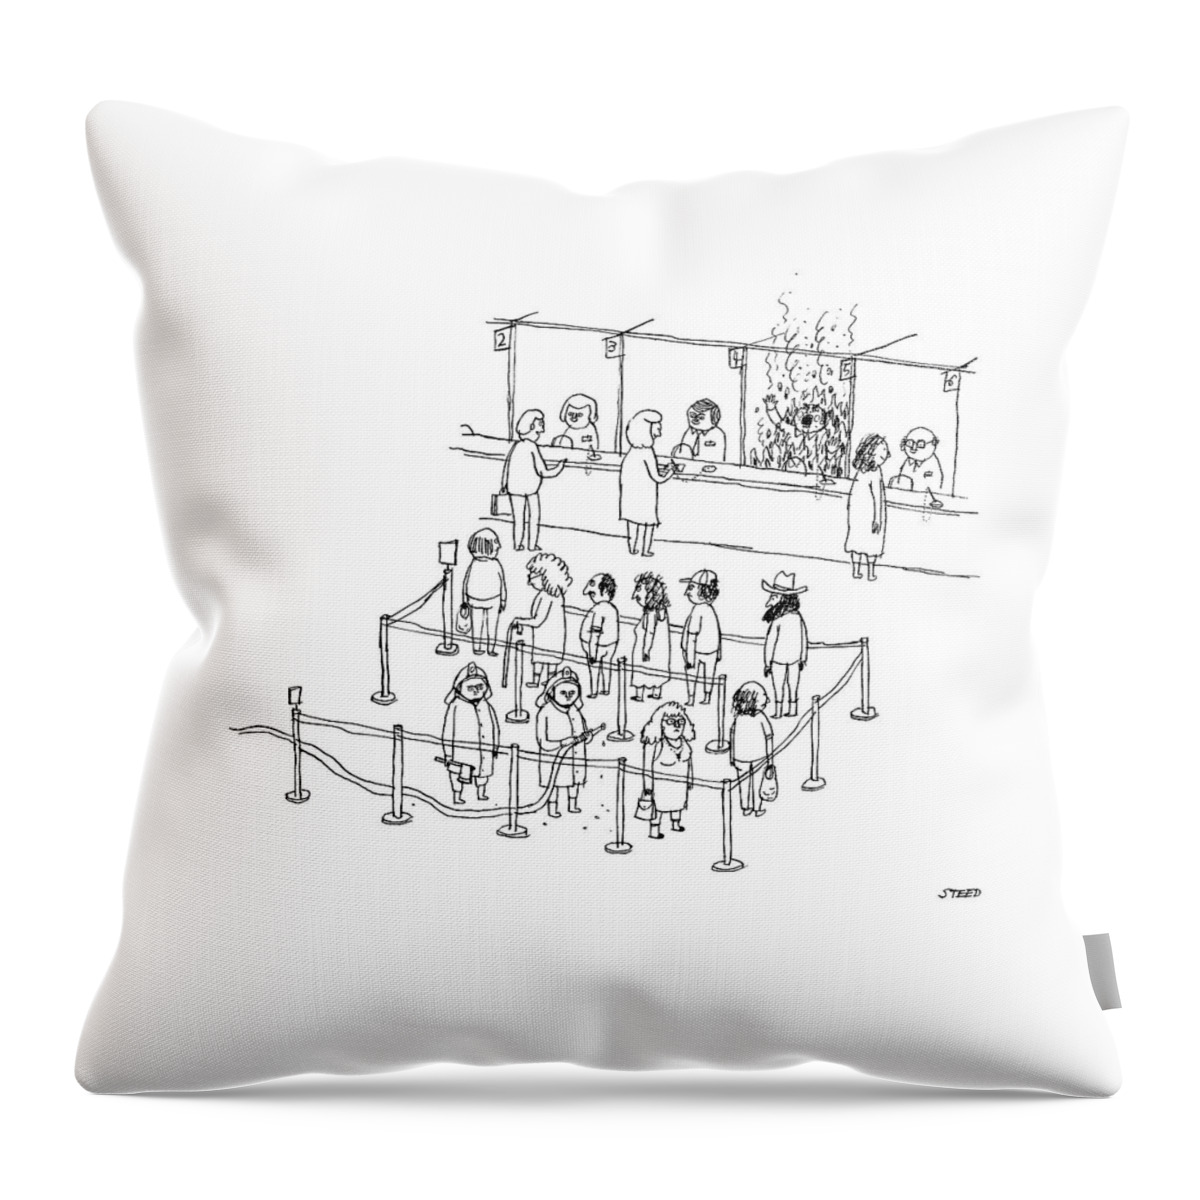 New Yorker February 14, 2022 Throw Pillow